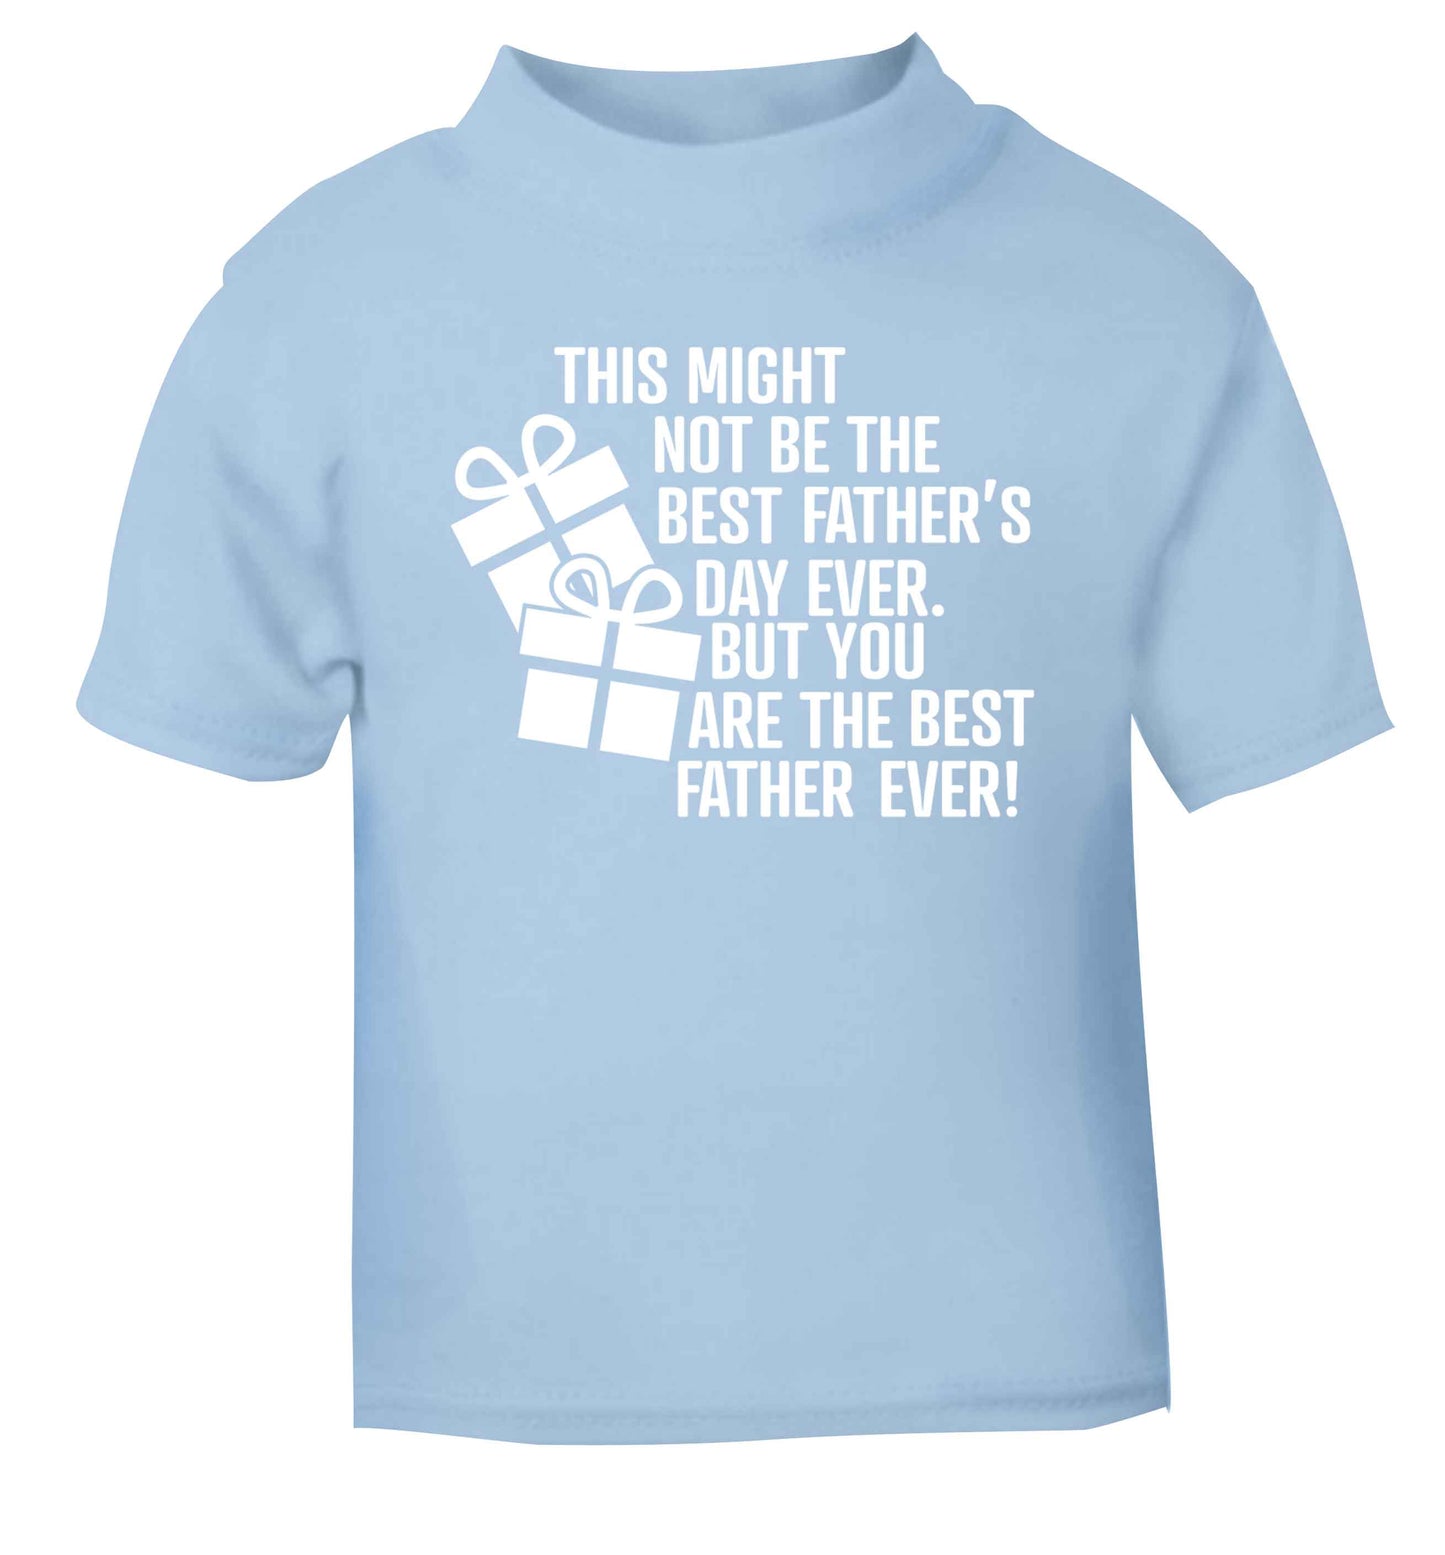 It might not be the best Father's Day ever but you are the best father ever! light blue baby toddler Tshirt 2 Years